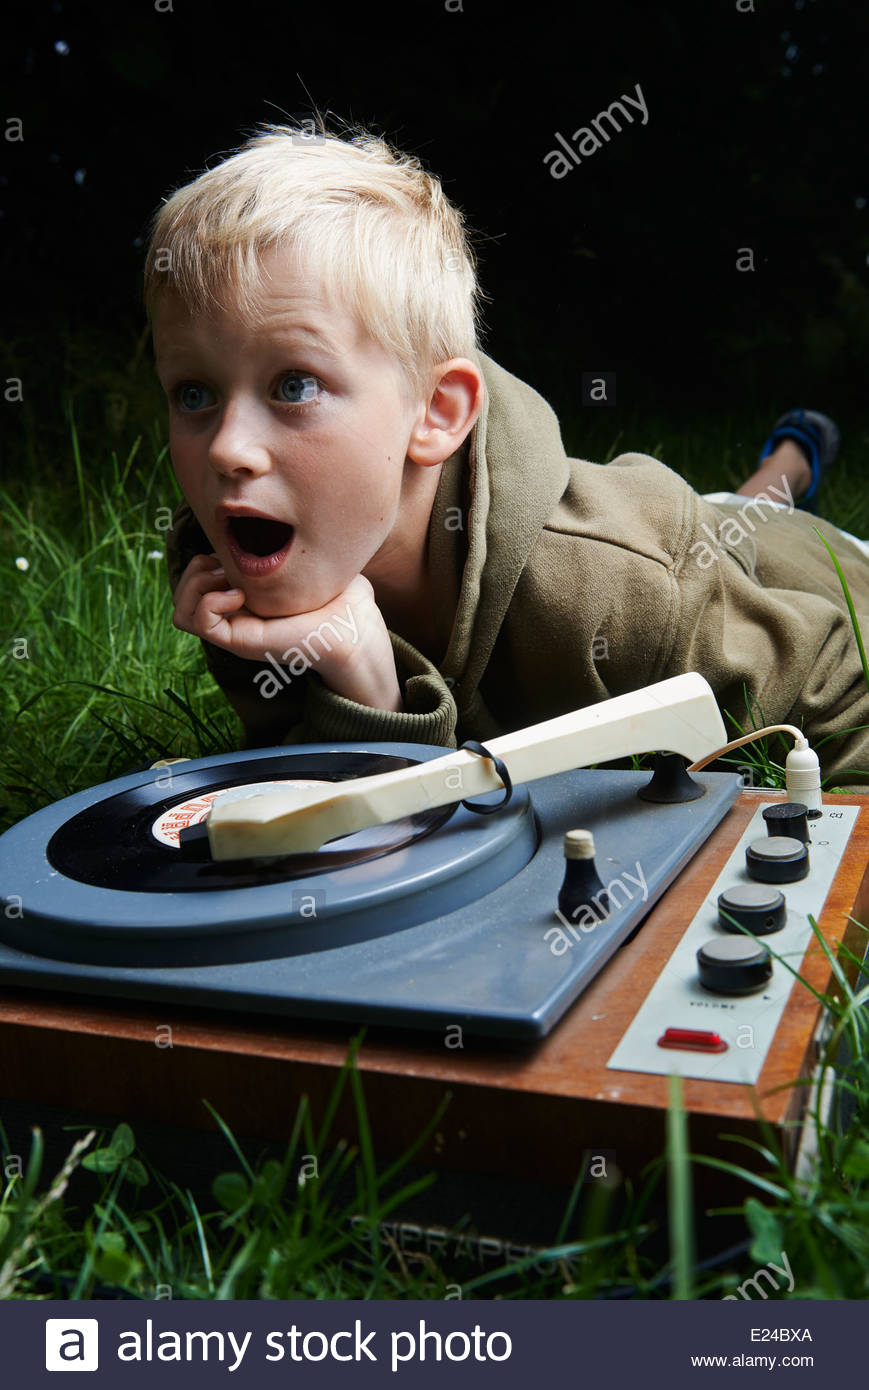 Colecciones de Discos. Child-blond-young-boy-playing-with-a-vintage-gramophone-vinyl-record-E24BXA